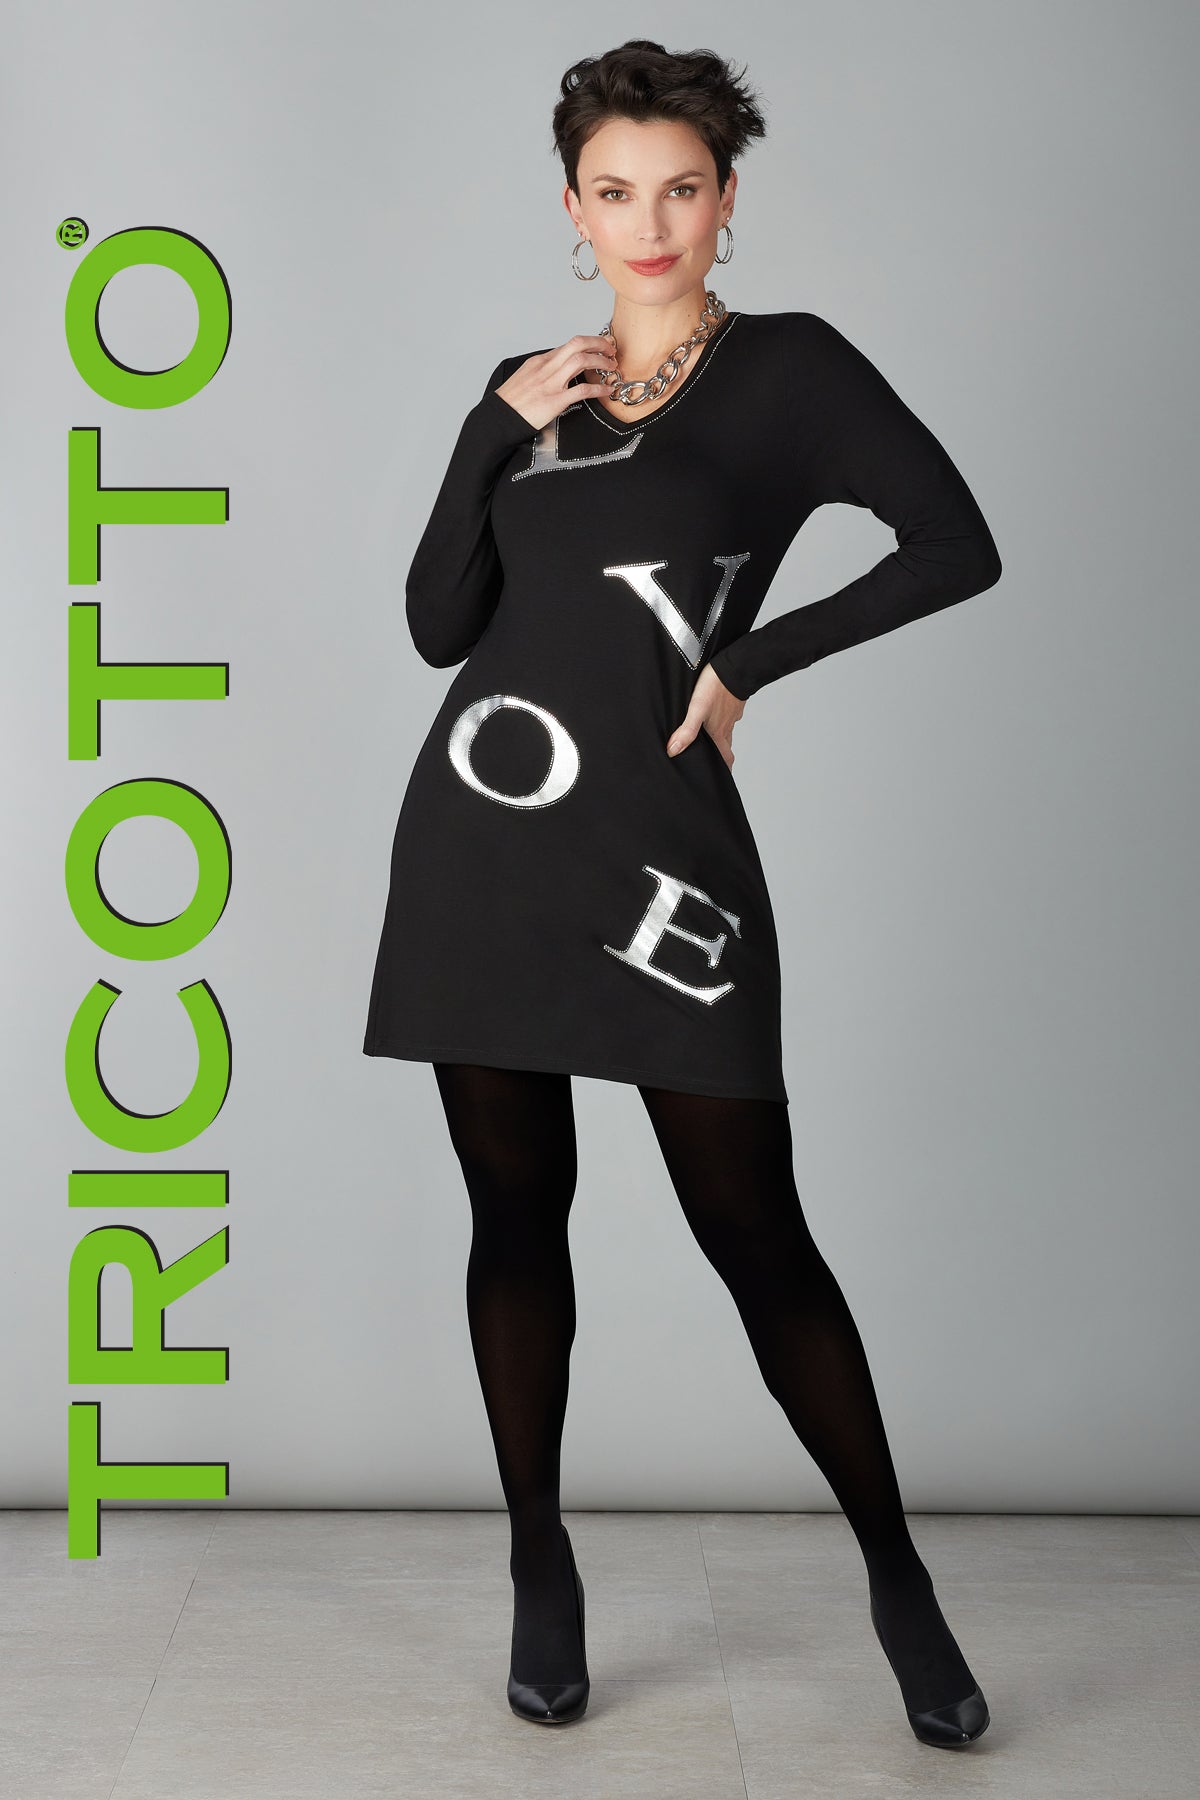 Tricotto Black Dress-Tricotto Love Black Dress-Buy Tricotto Dresses Online-Tricotto Clothing Montreal-Little Black Dresses Online